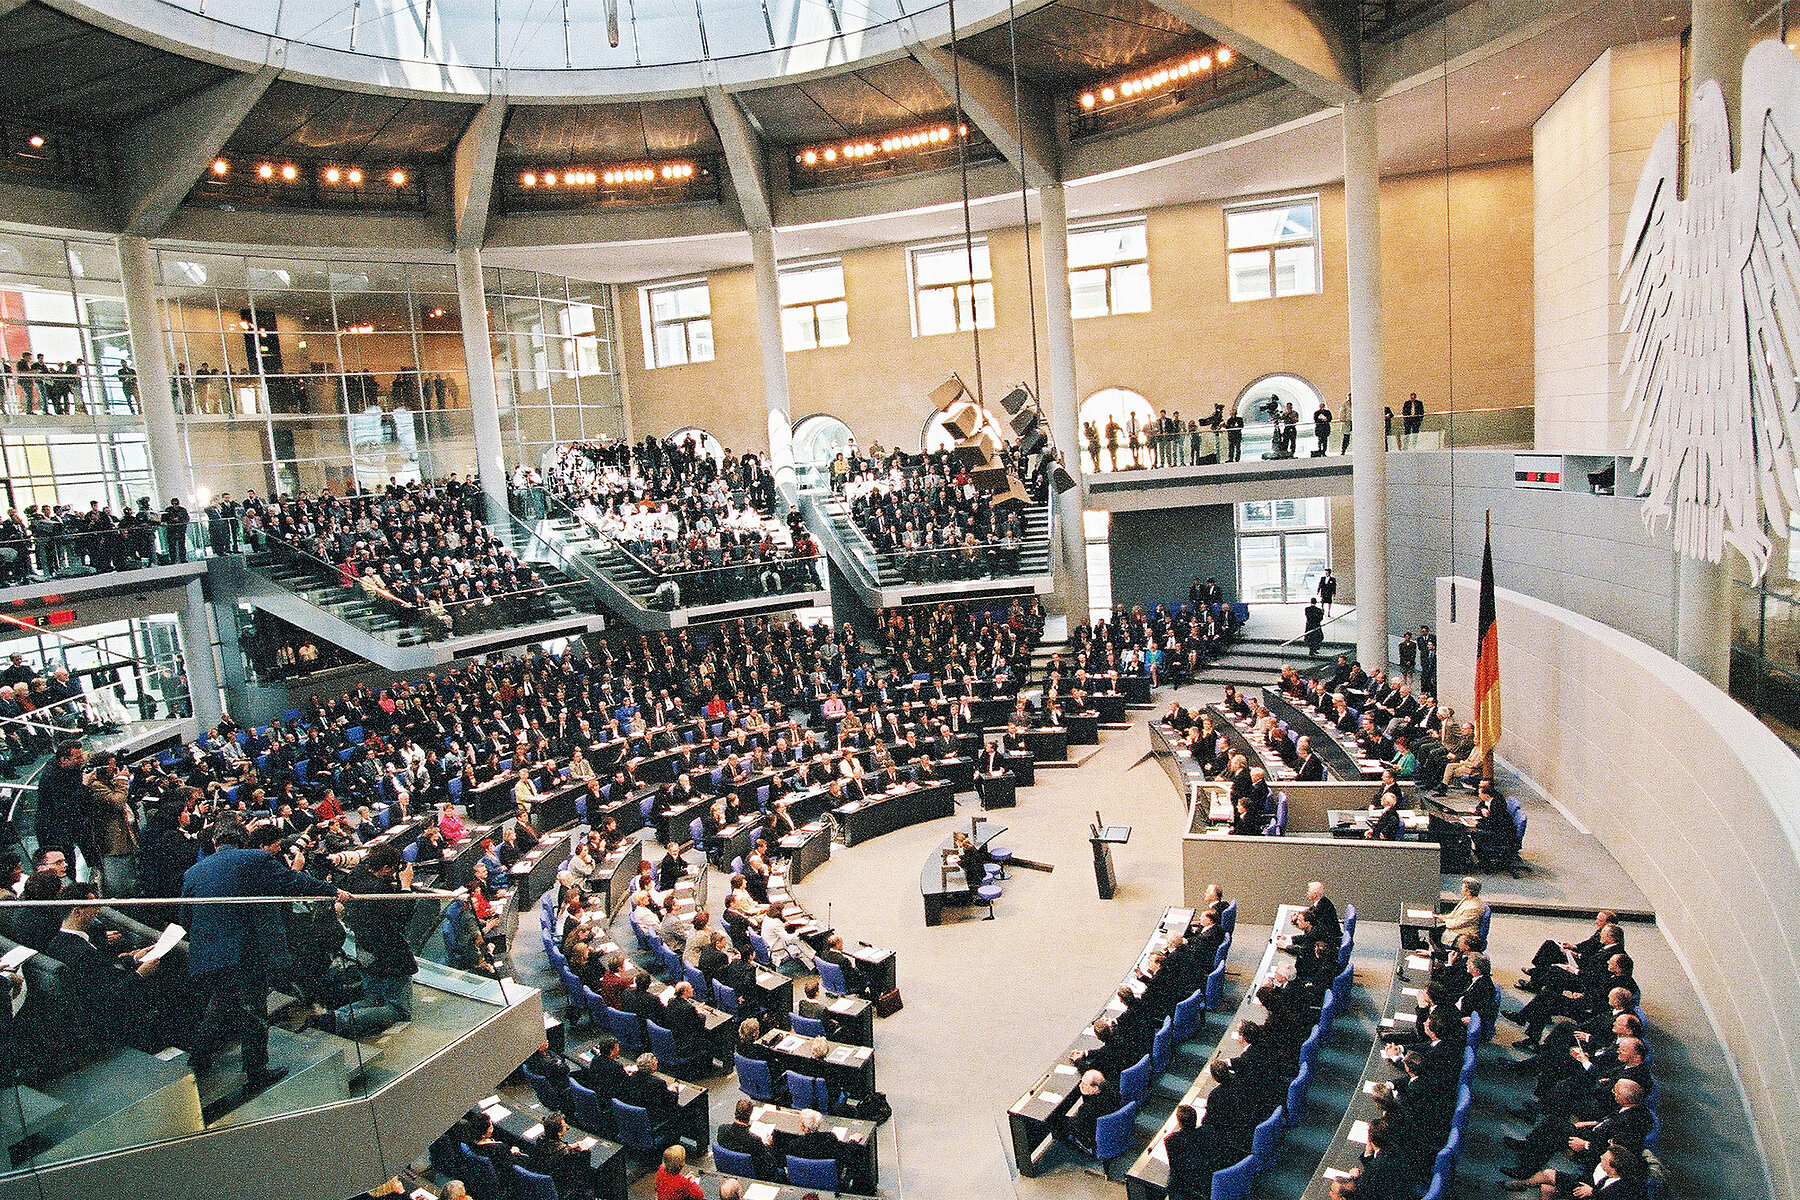 View from above of the plenary hall with fully occupied rows of chairs in a circular arrangement. A federal eagle hangs on the wall on the right.